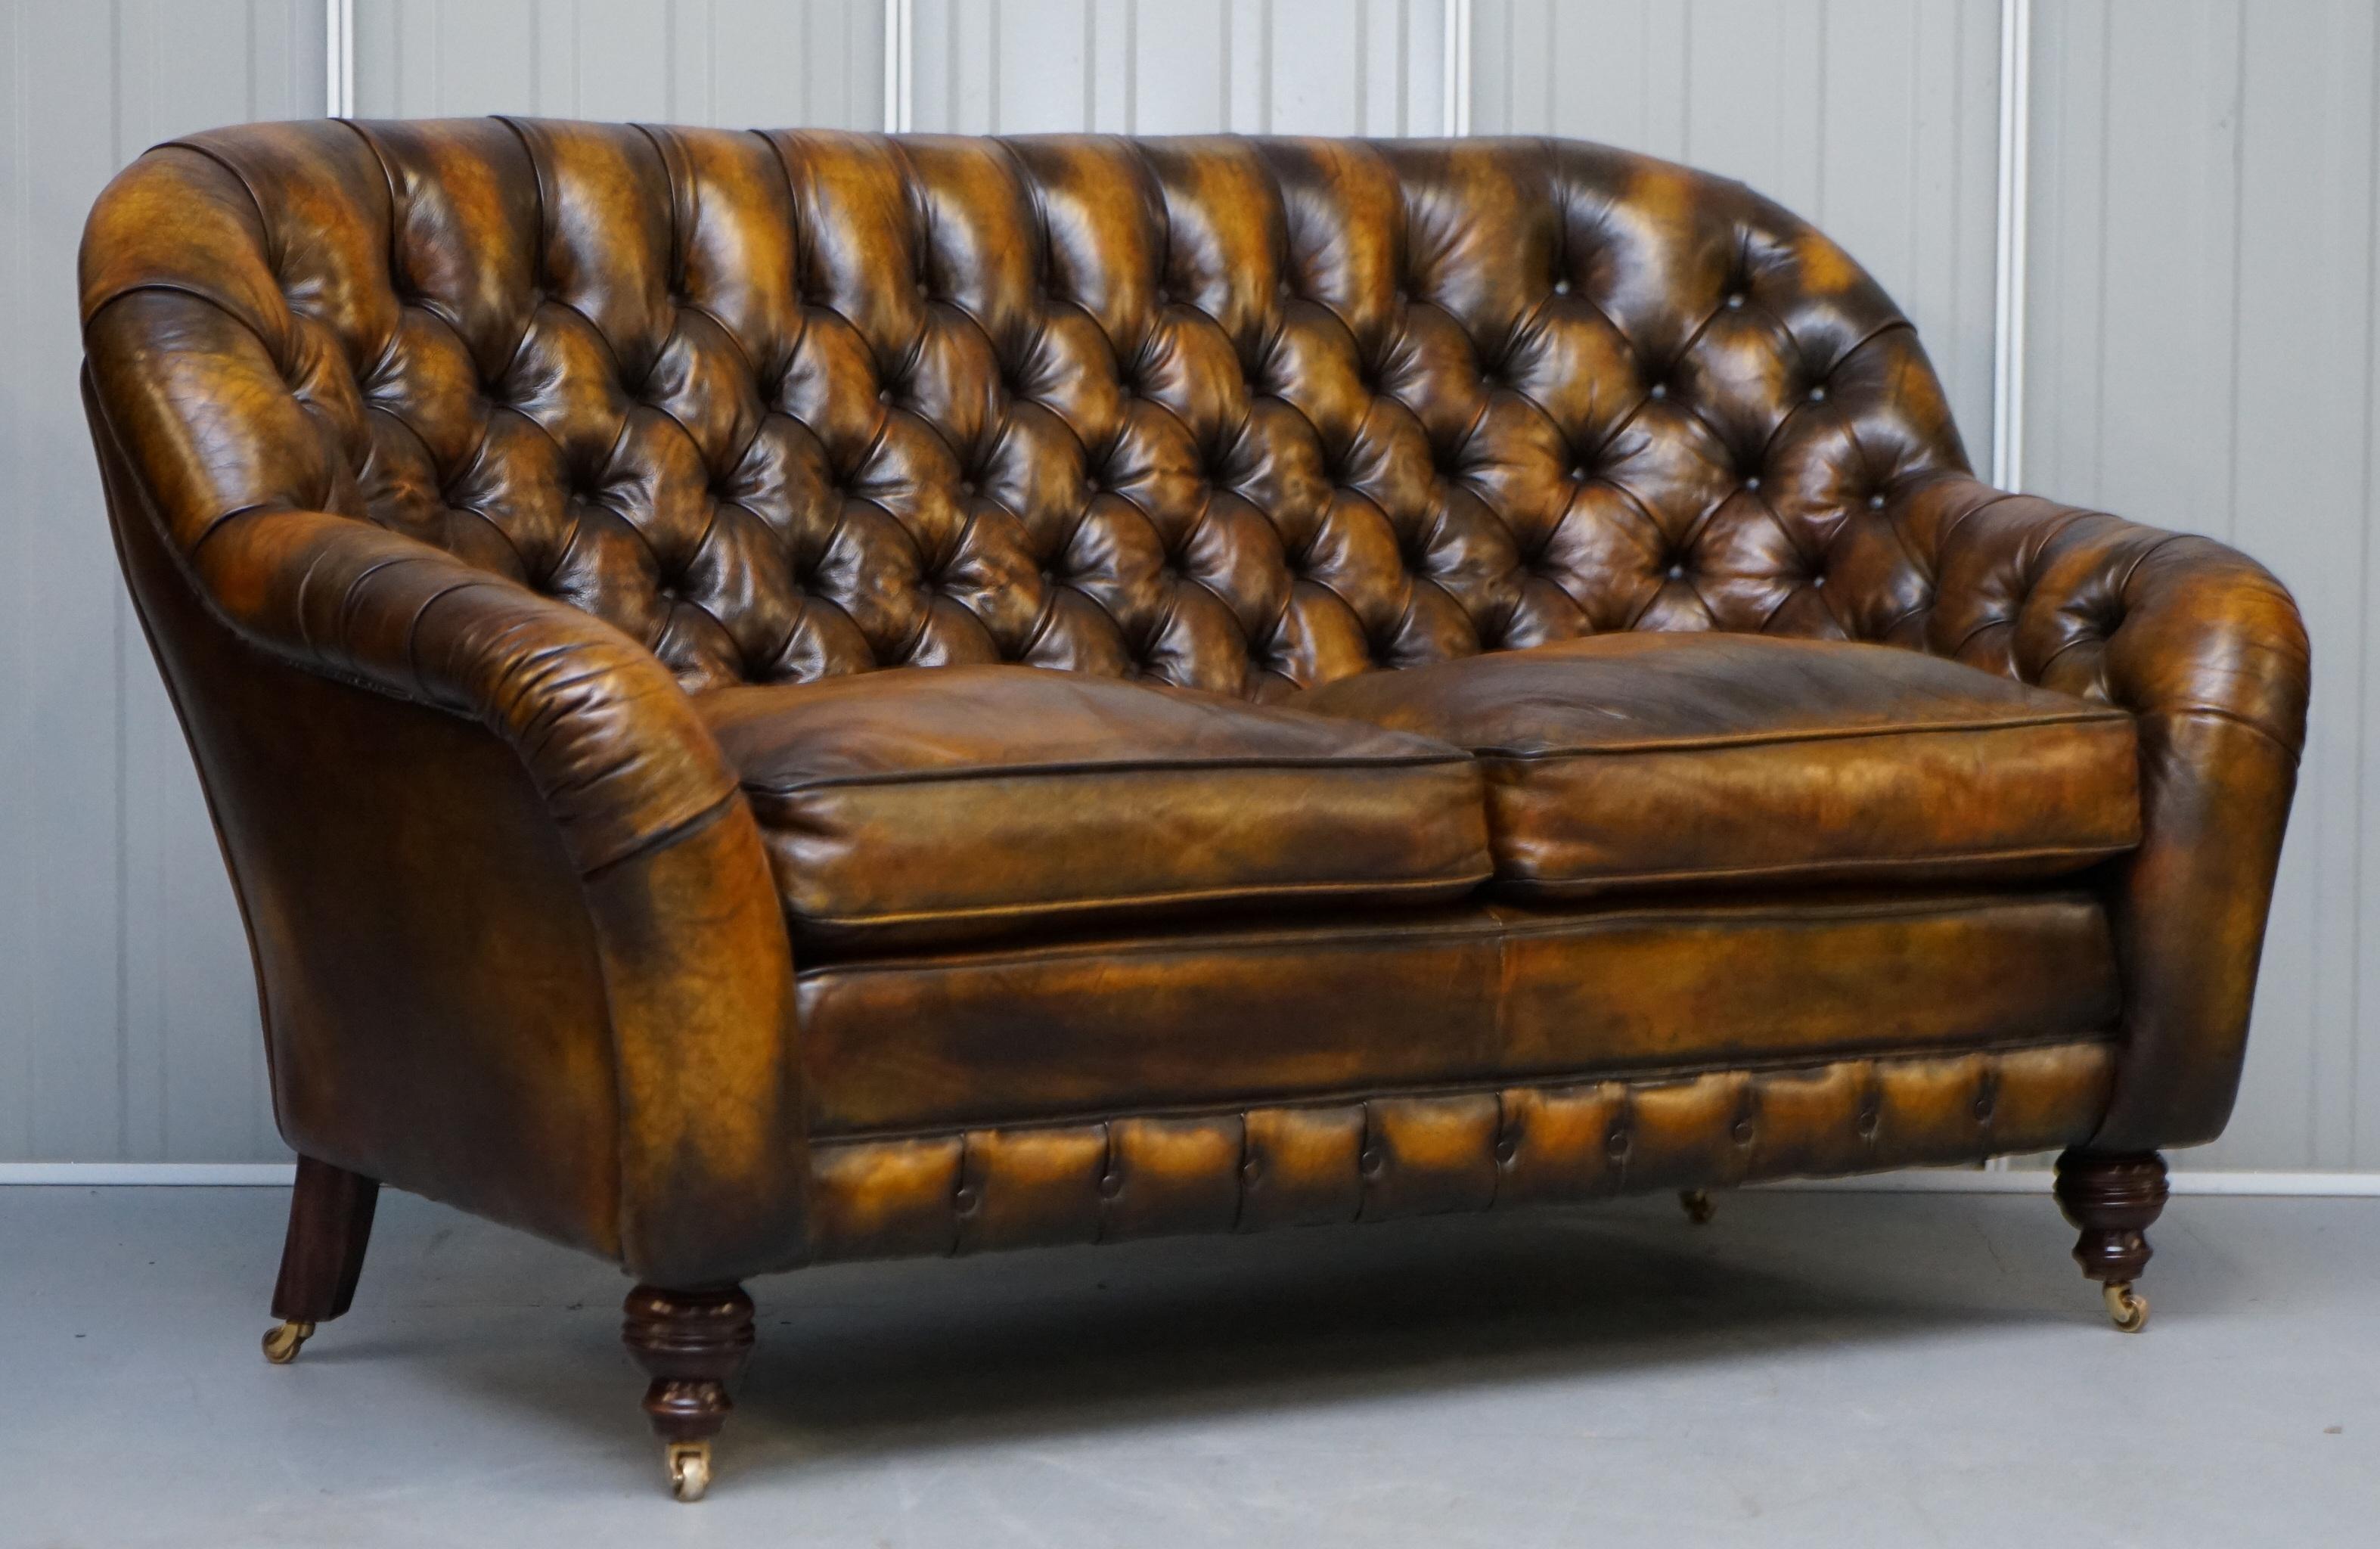 We are delighted to offer for sale this stunning pair of fully restored hand dyed Whisky brown leather Chesterfield two-seat sofas with feather filled cushions

A very good looking and well made pair of sofas, they have feather filled cushions,